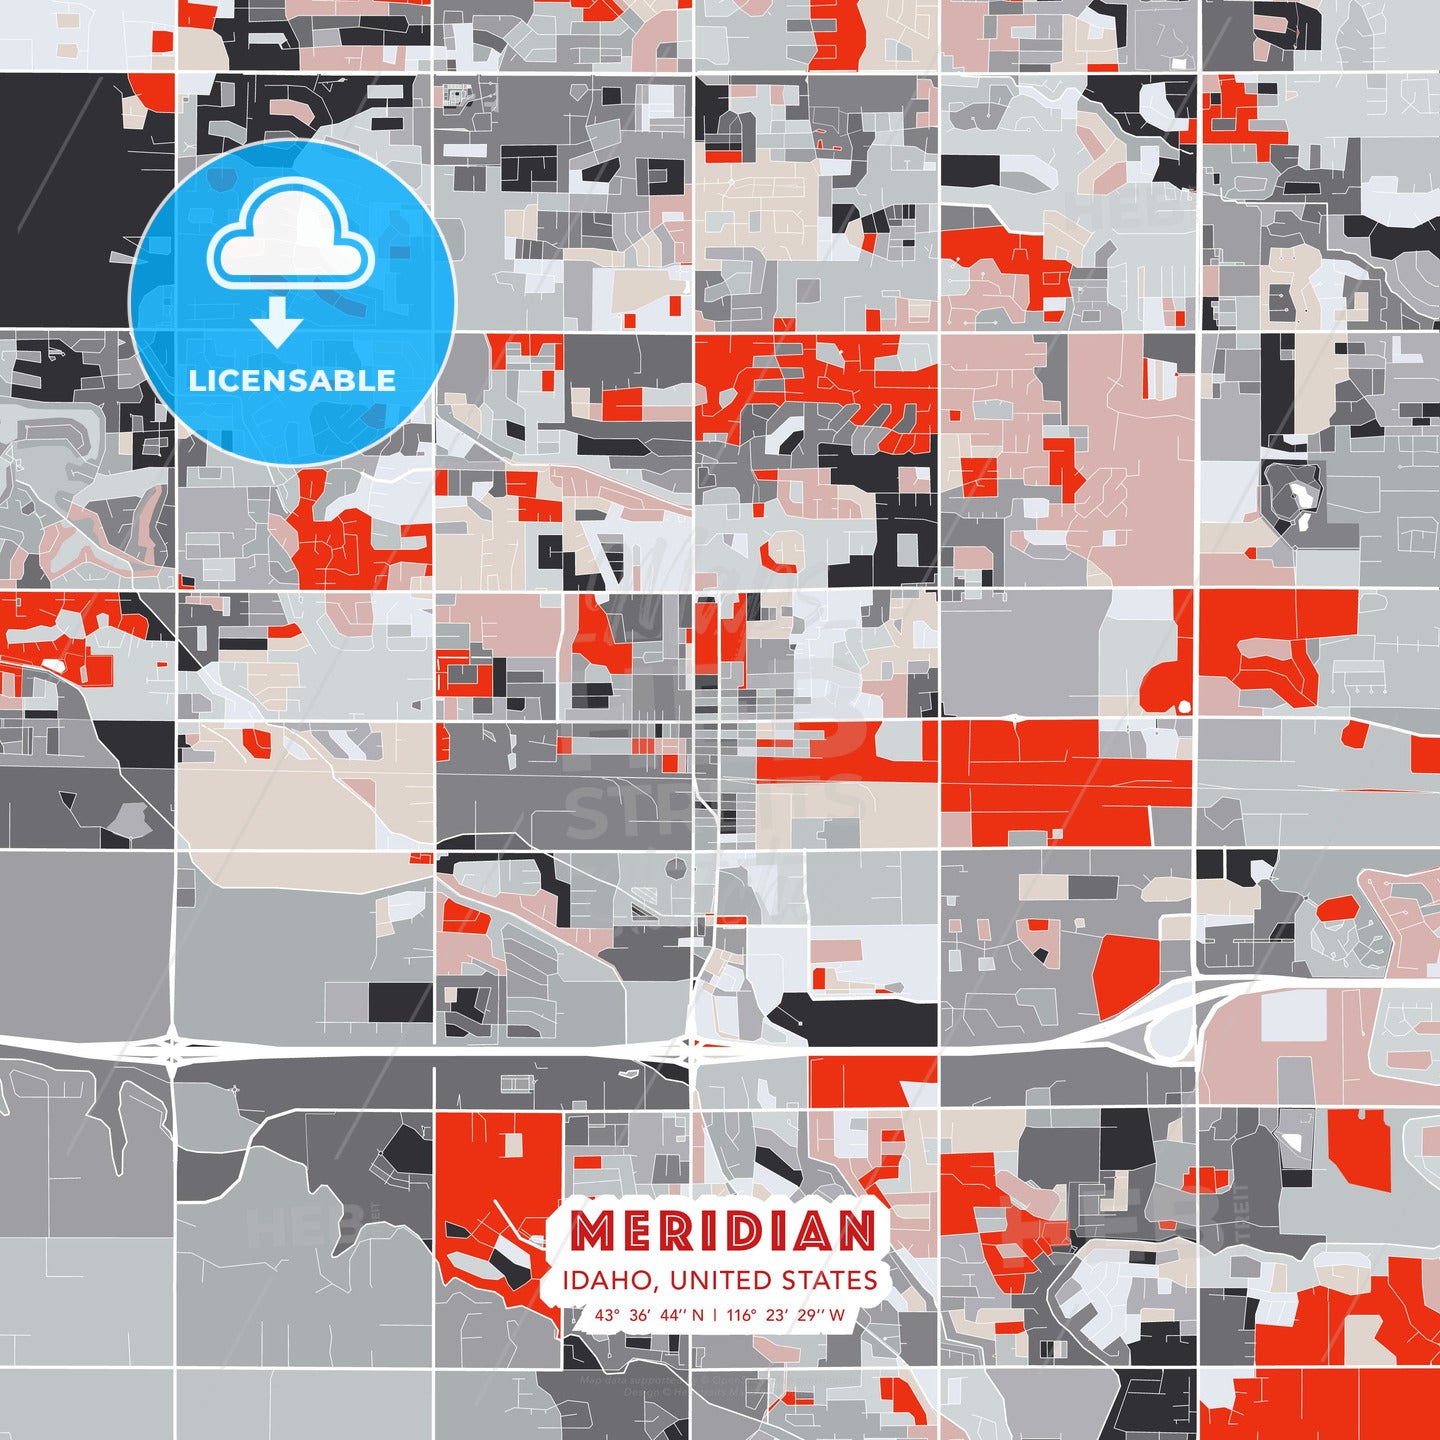 Meridian, Idaho, United States, modern map - HEBSTREITS Sketches